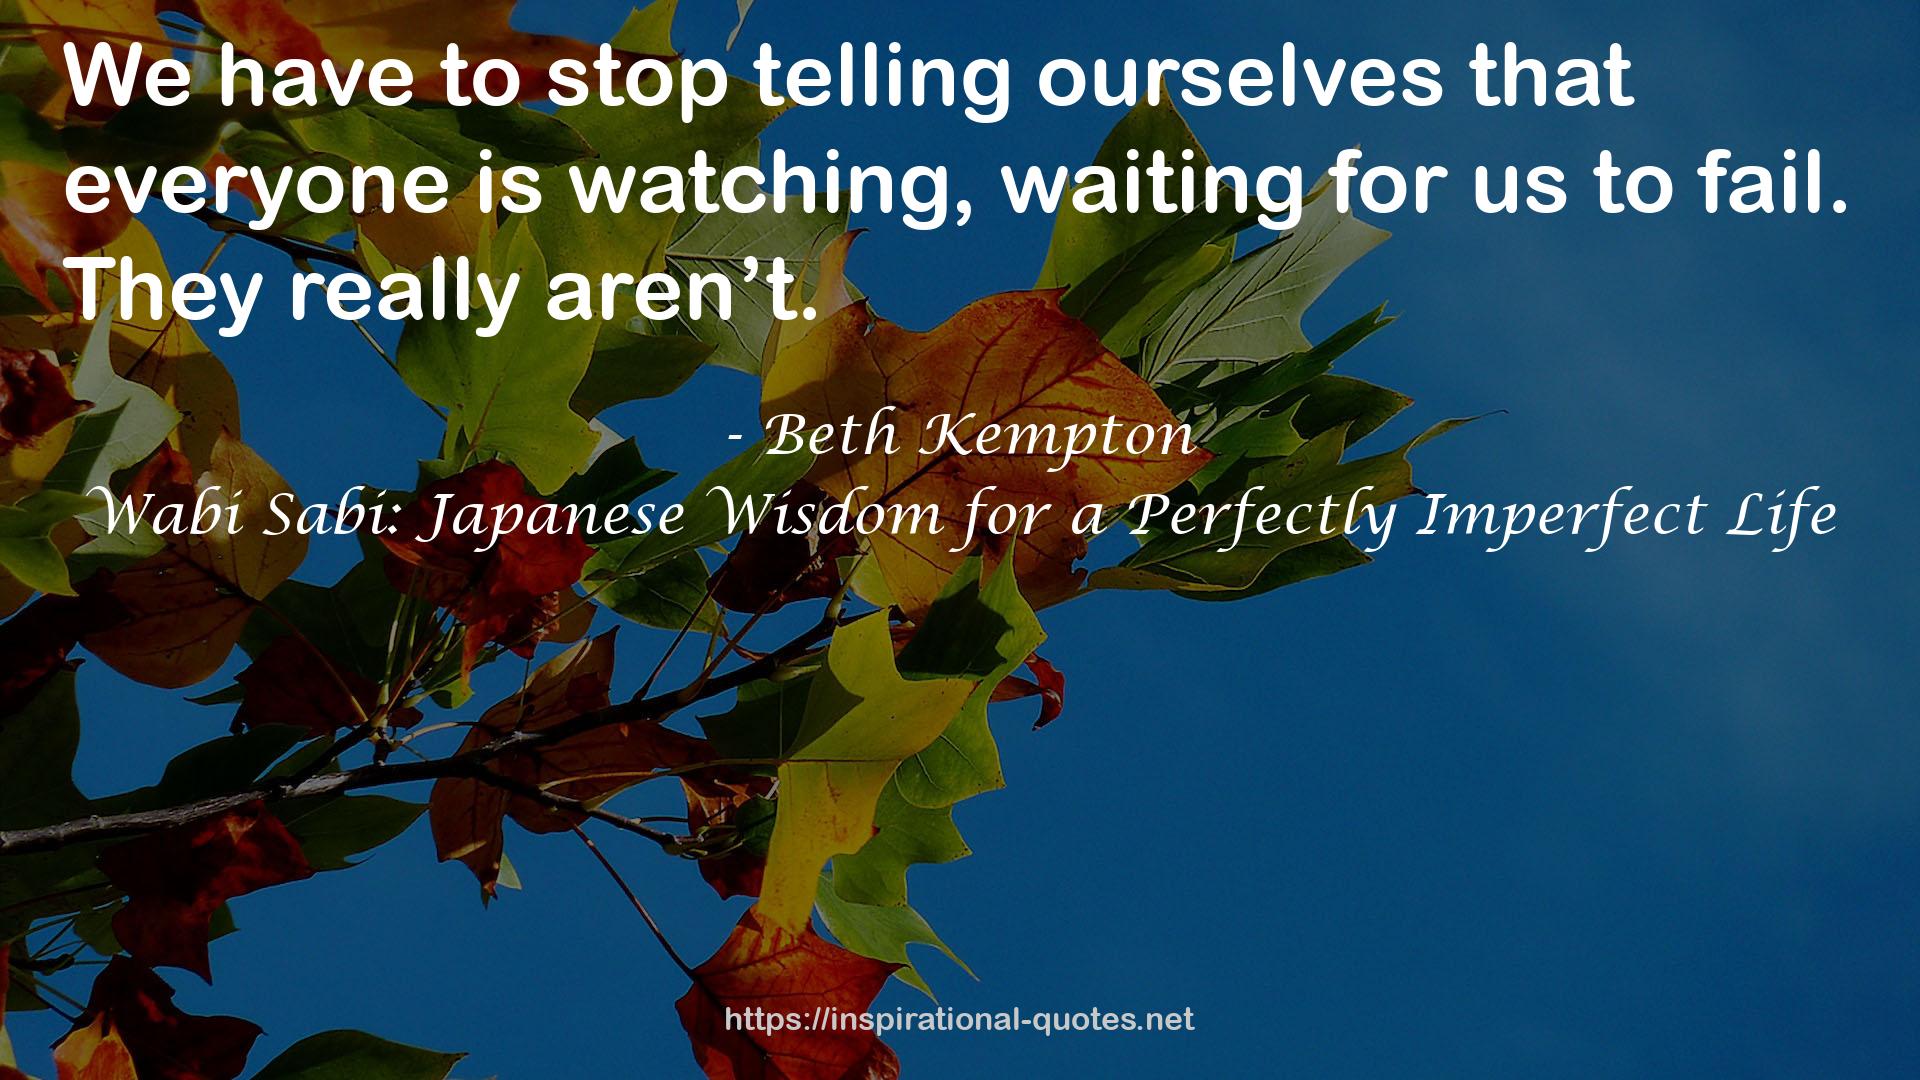 Wabi Sabi: Japanese Wisdom for a Perfectly Imperfect Life QUOTES